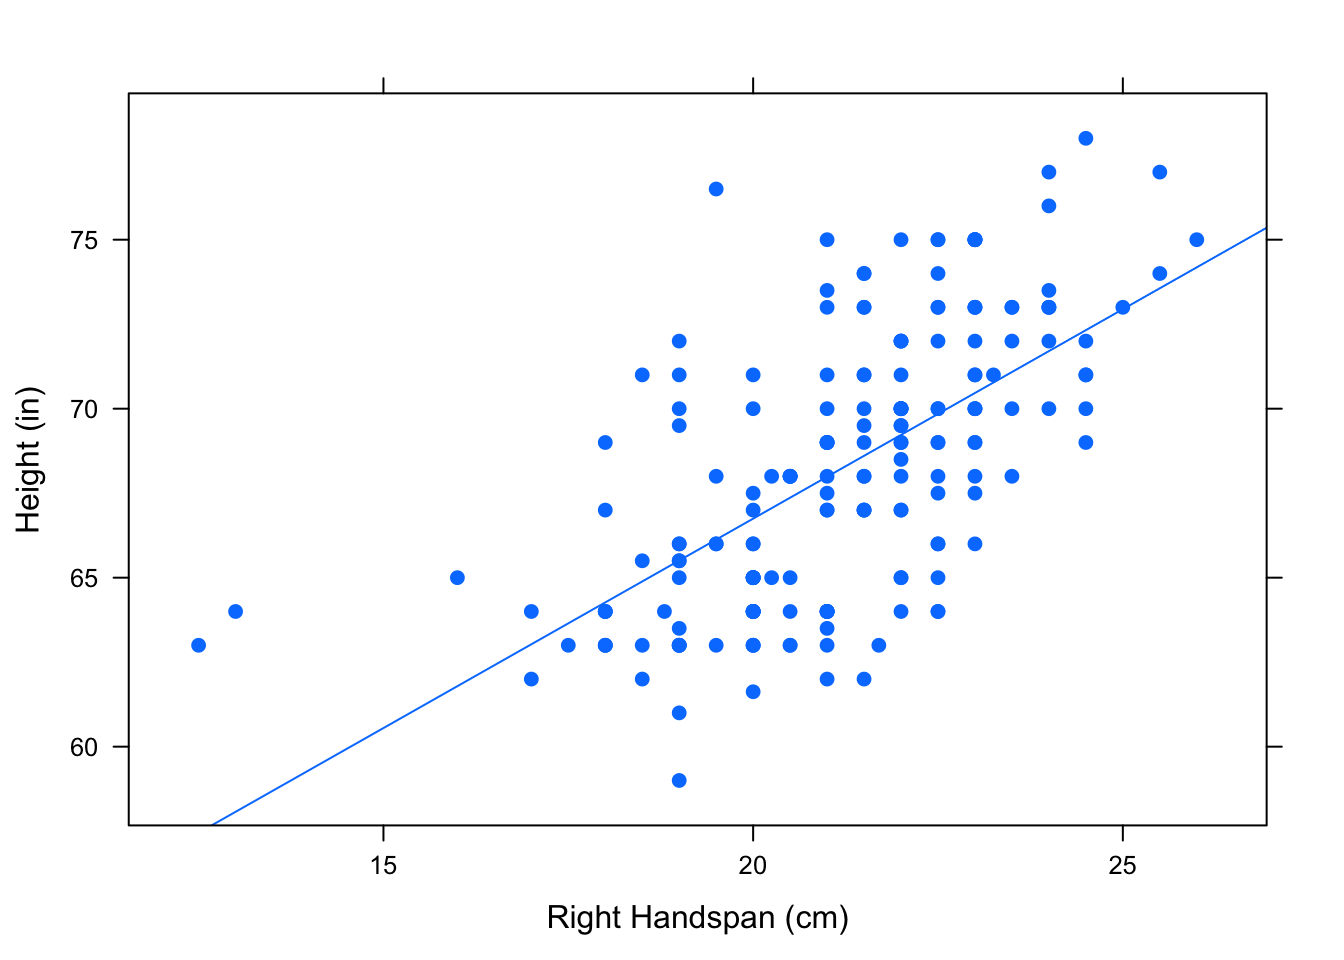 Hand/Height Regression Line:  The regression line is plotted on the scatterplot showing the relationship between right handspan and height.